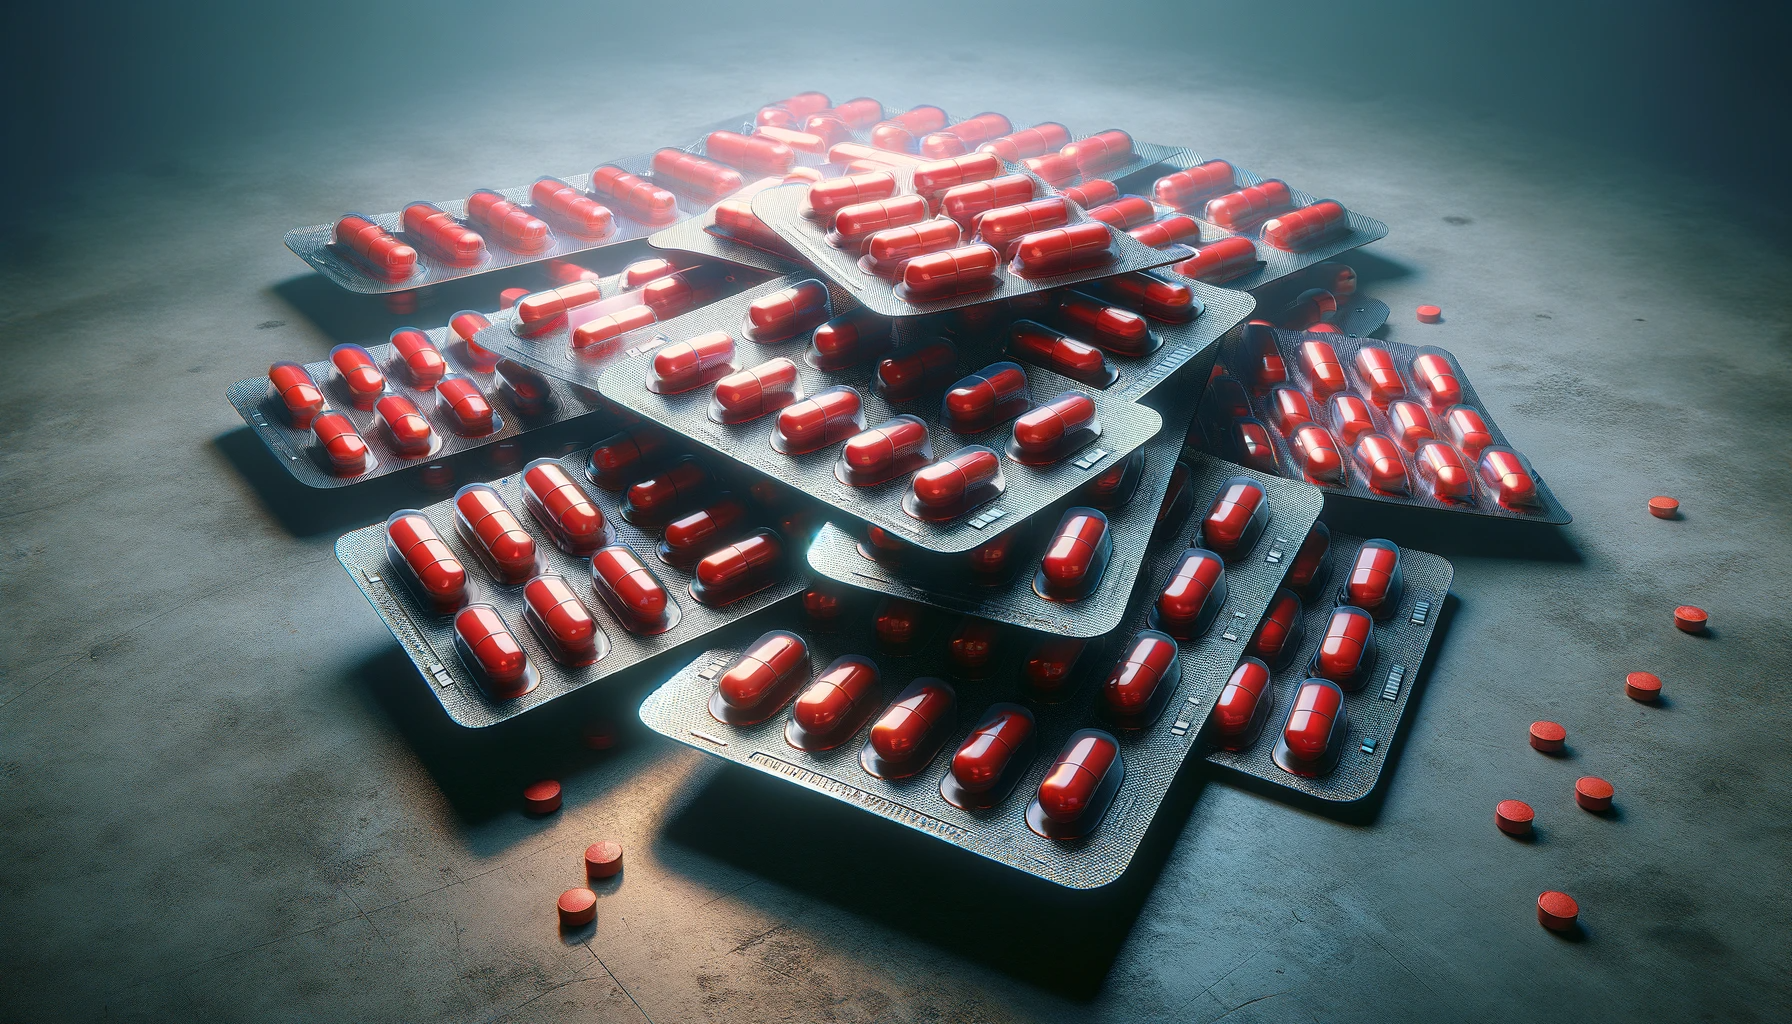 DALL·E 2024 01 29 16.17.22 Create an image showing several blister packs of red pills arranged on a grey surface. The blister packs are partially opened revealing the pills ins